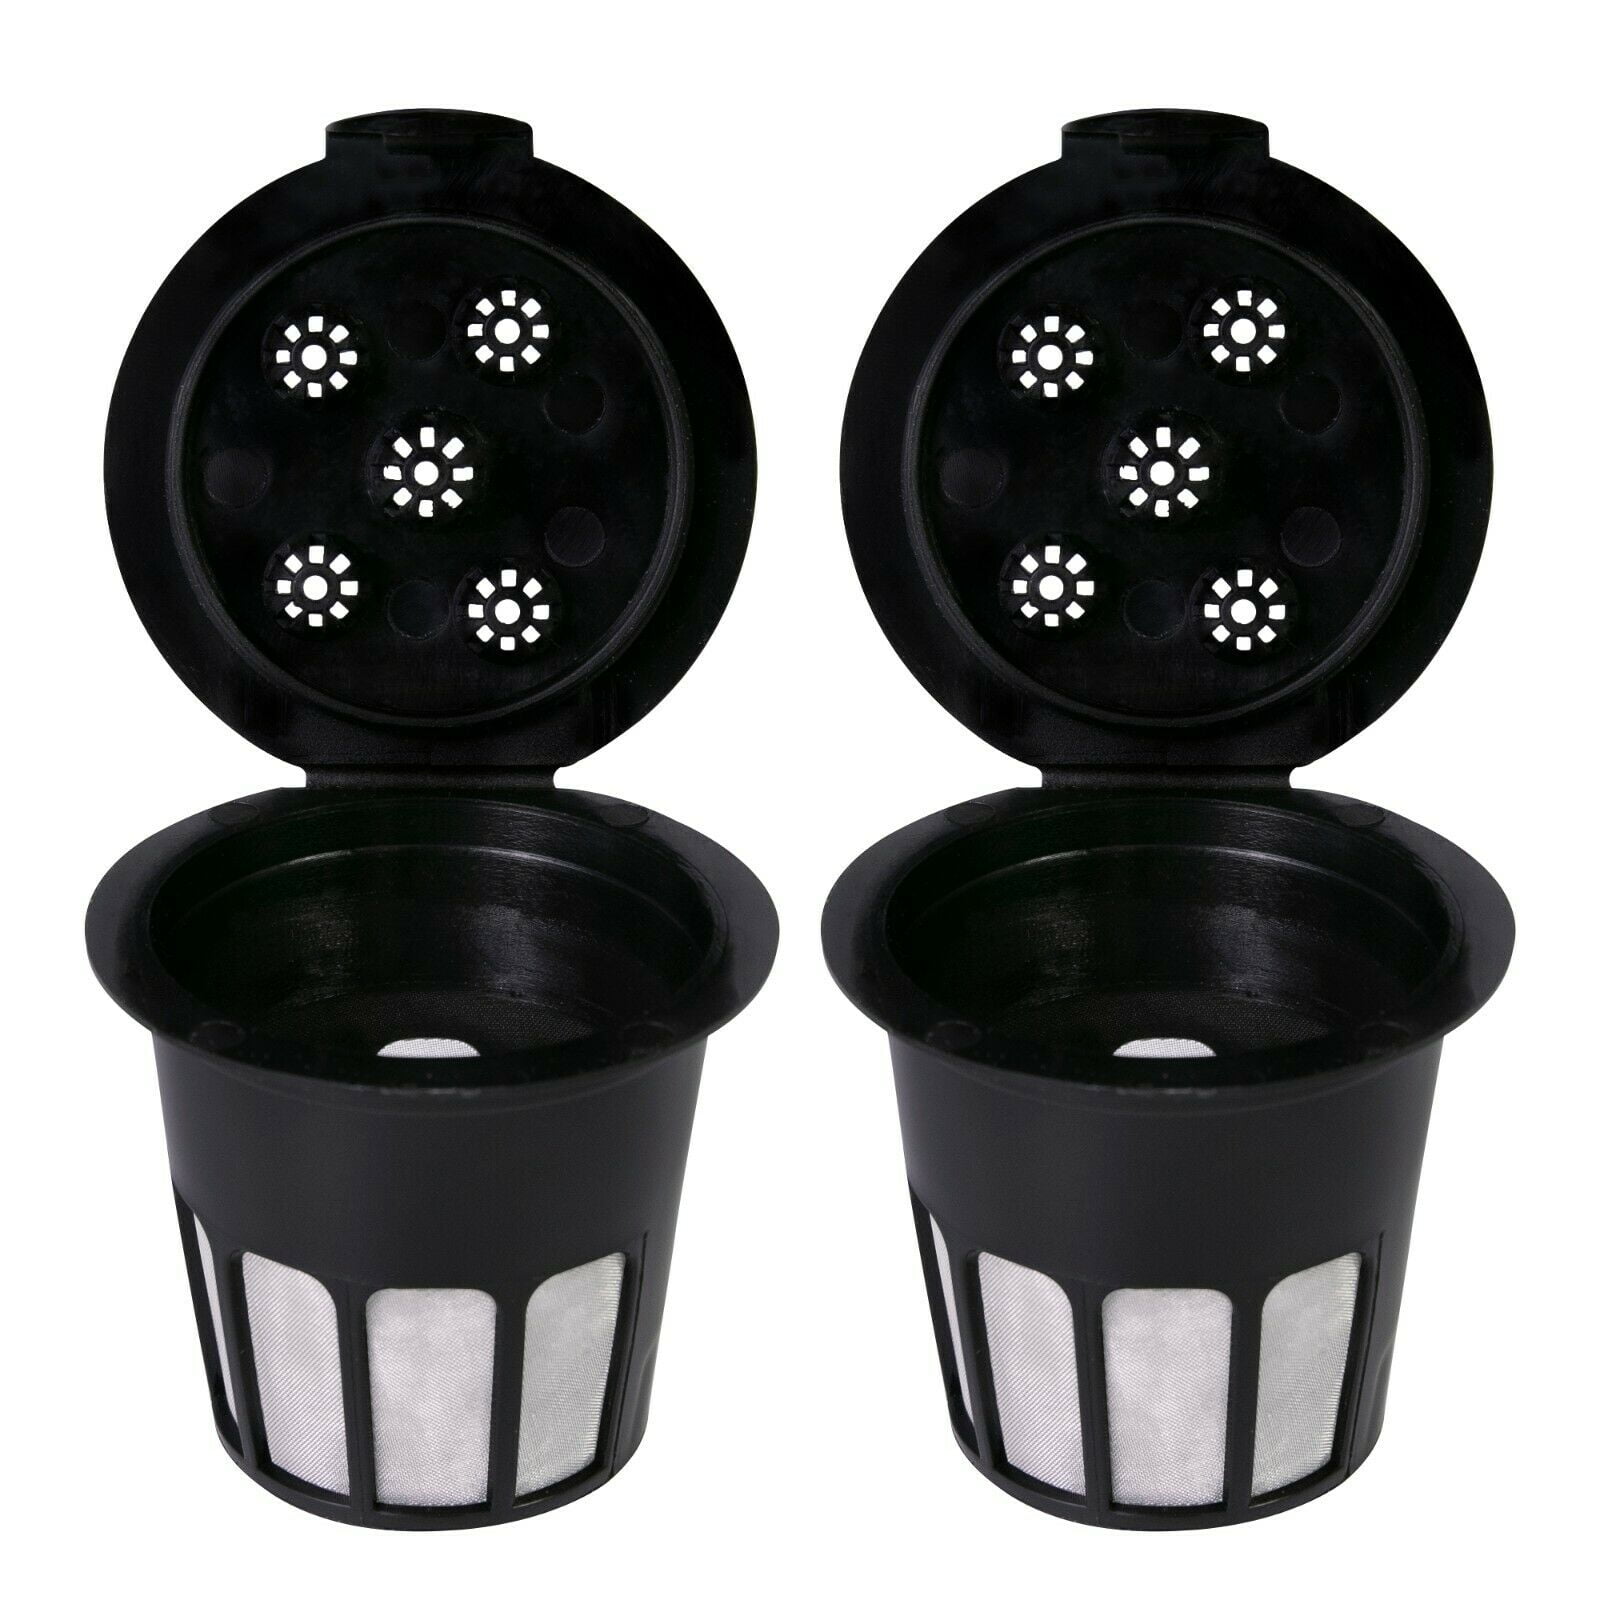 Café Supreme 5 prong Reusable K-Cup Coffee Filter (2 Pack) by Perfect